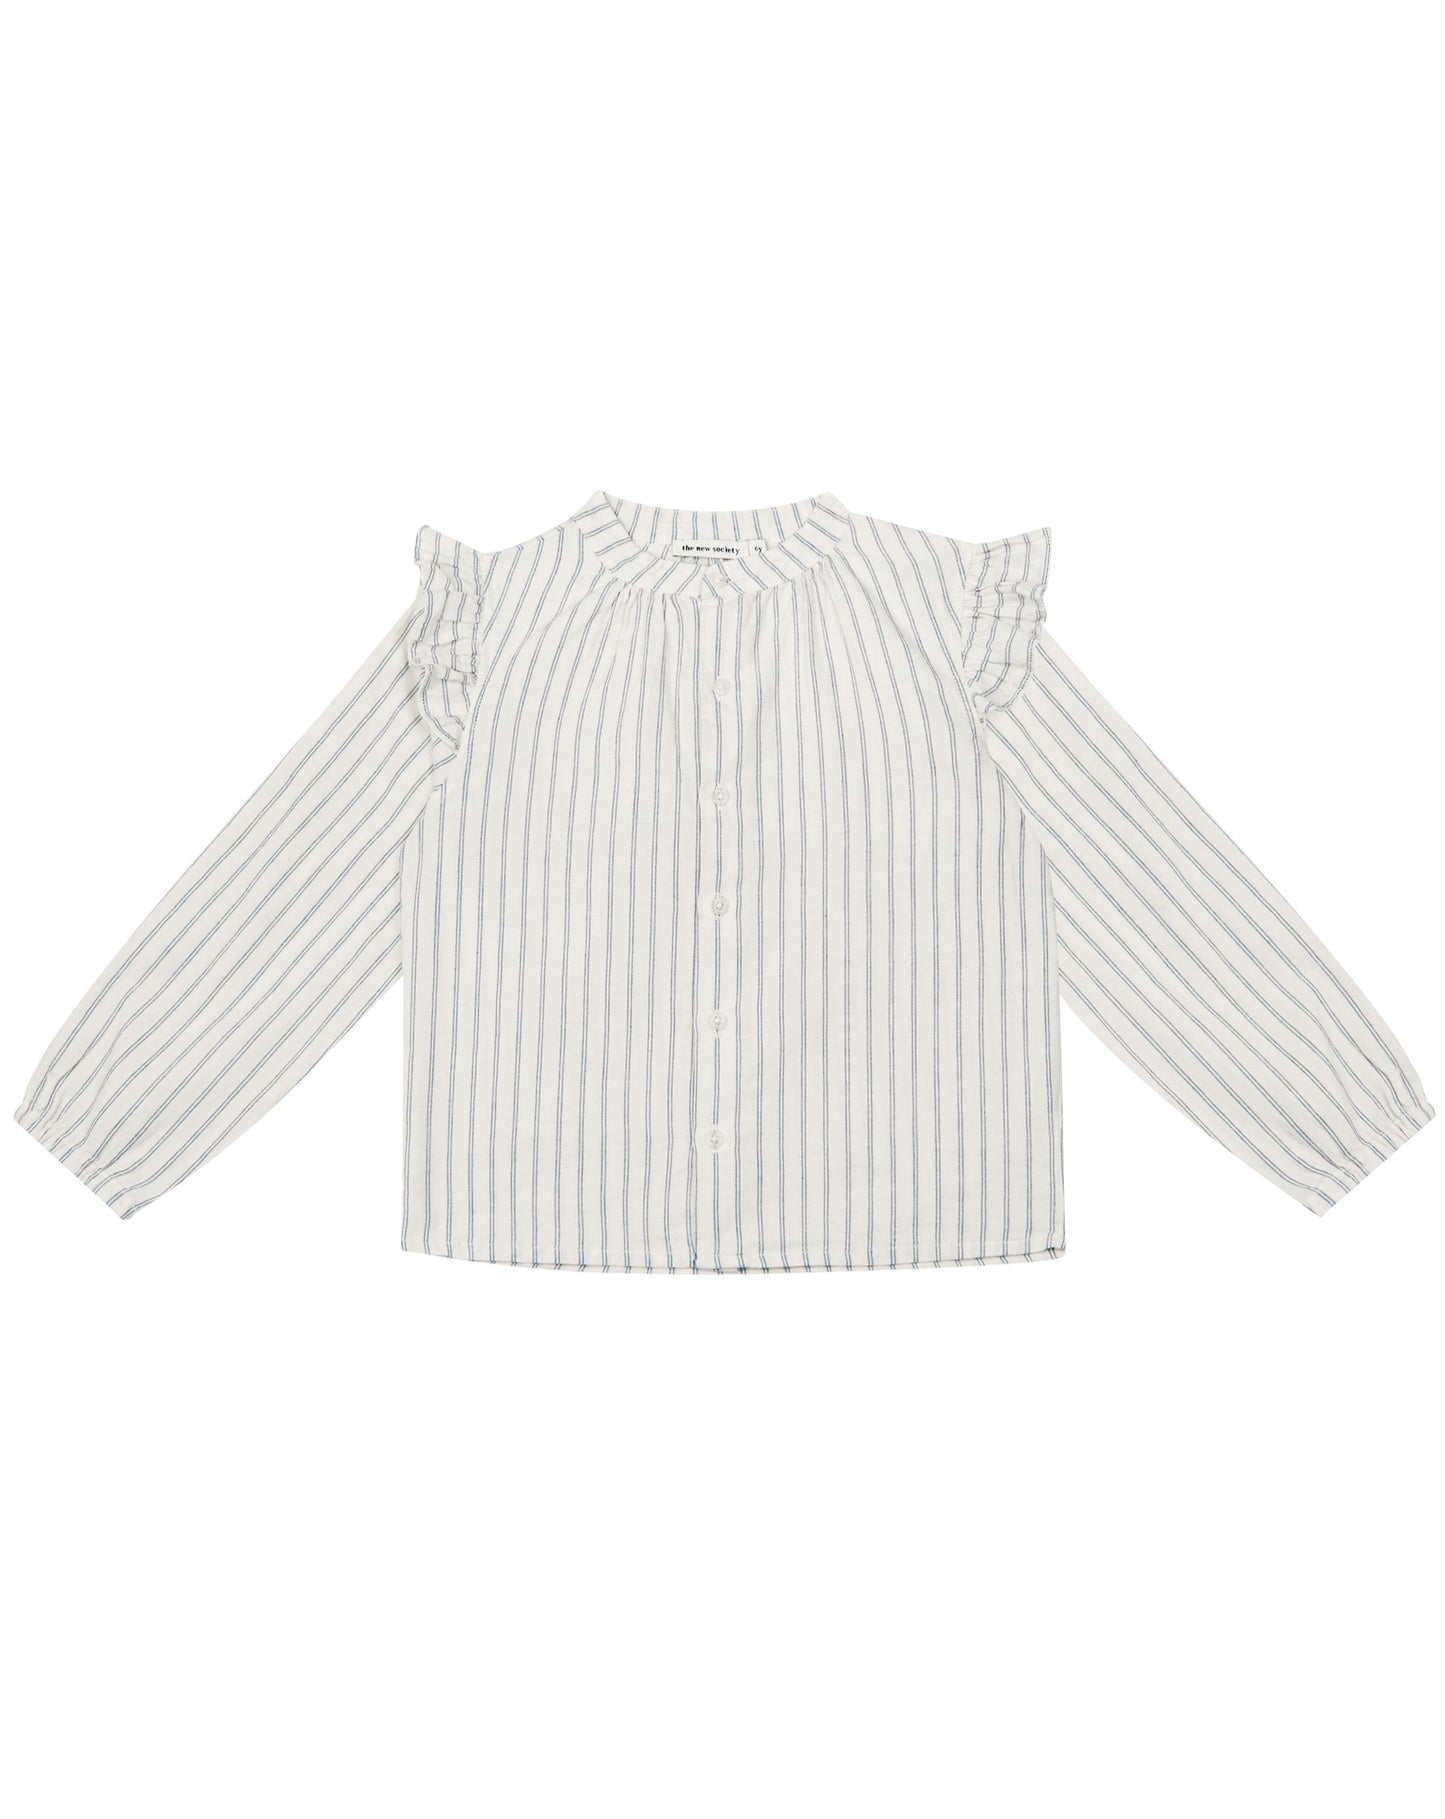 Classic Stripe Blouse Tops The New Society 